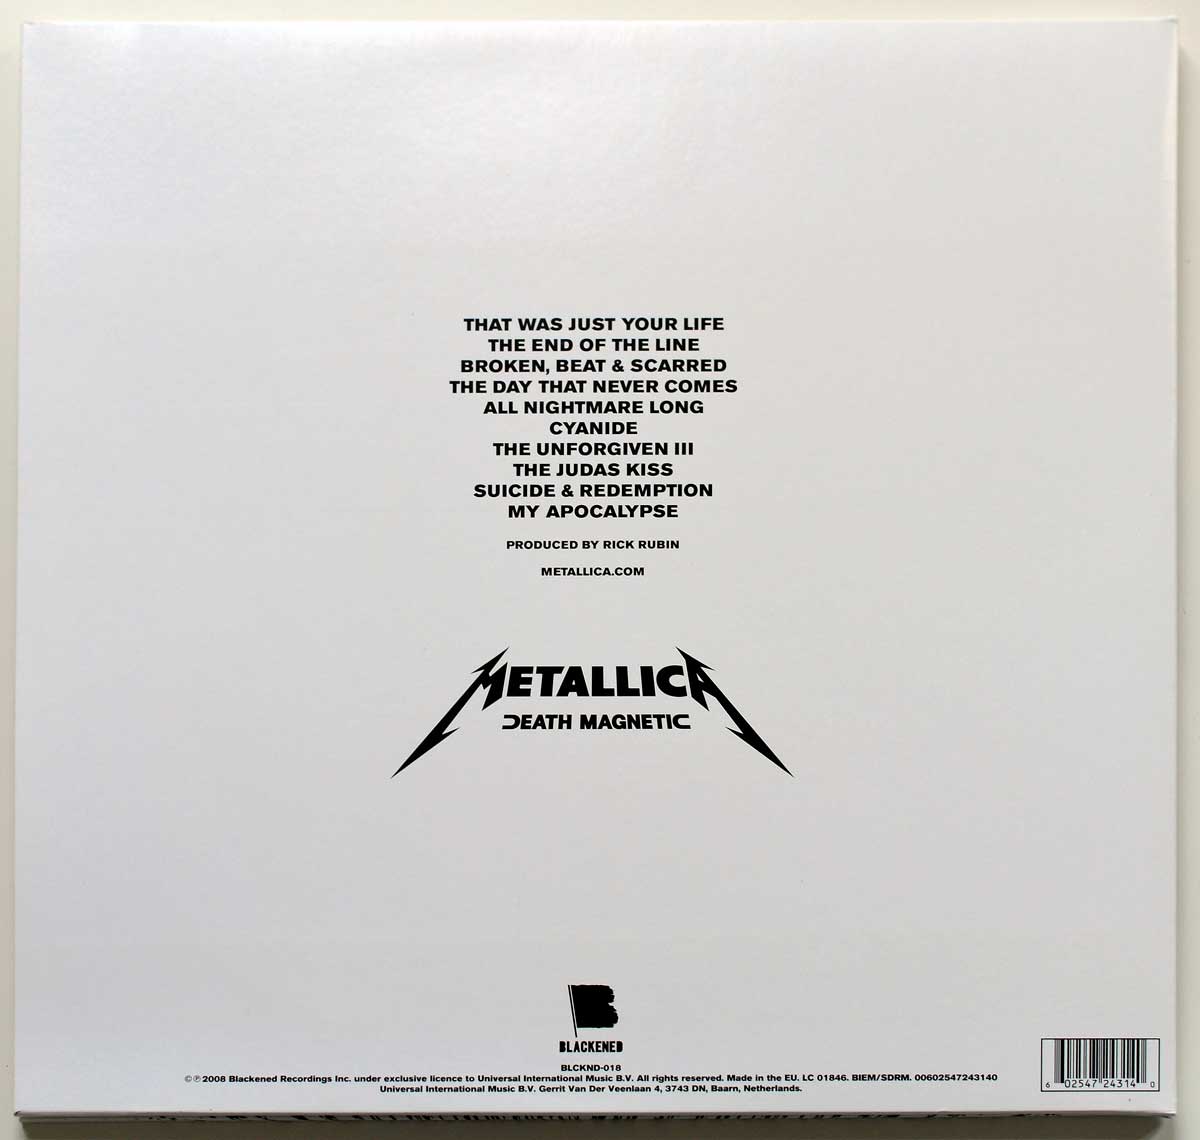 Photo of album back cover METALLICA - Death Magnetic Blackened Records Gatefold Cover 12" 